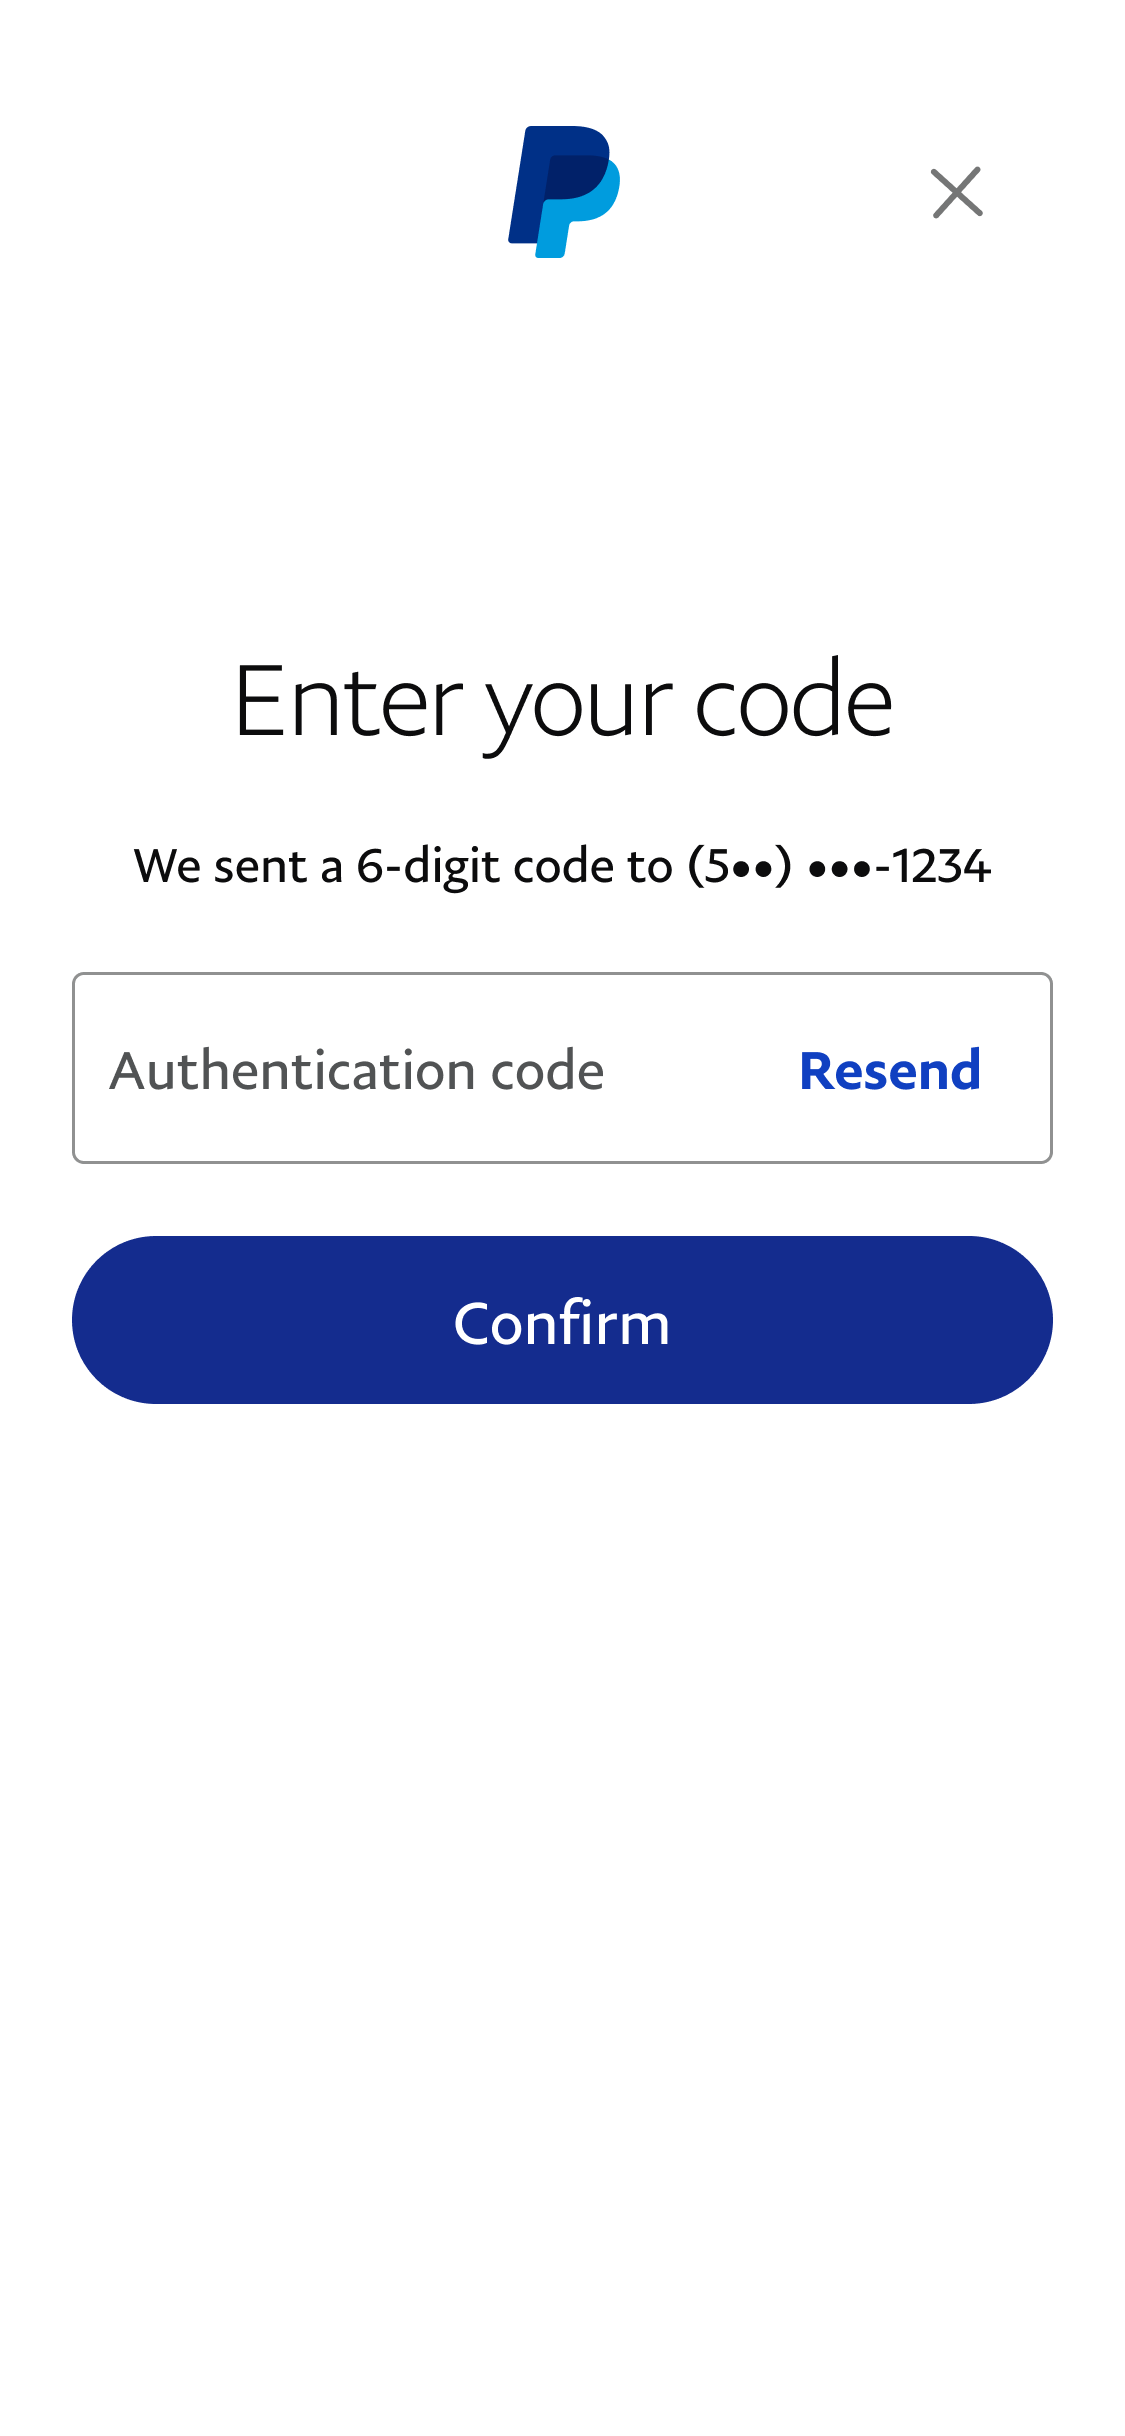 An illustration of the final step when you'll enter the 6-digit authentication code we've sent you